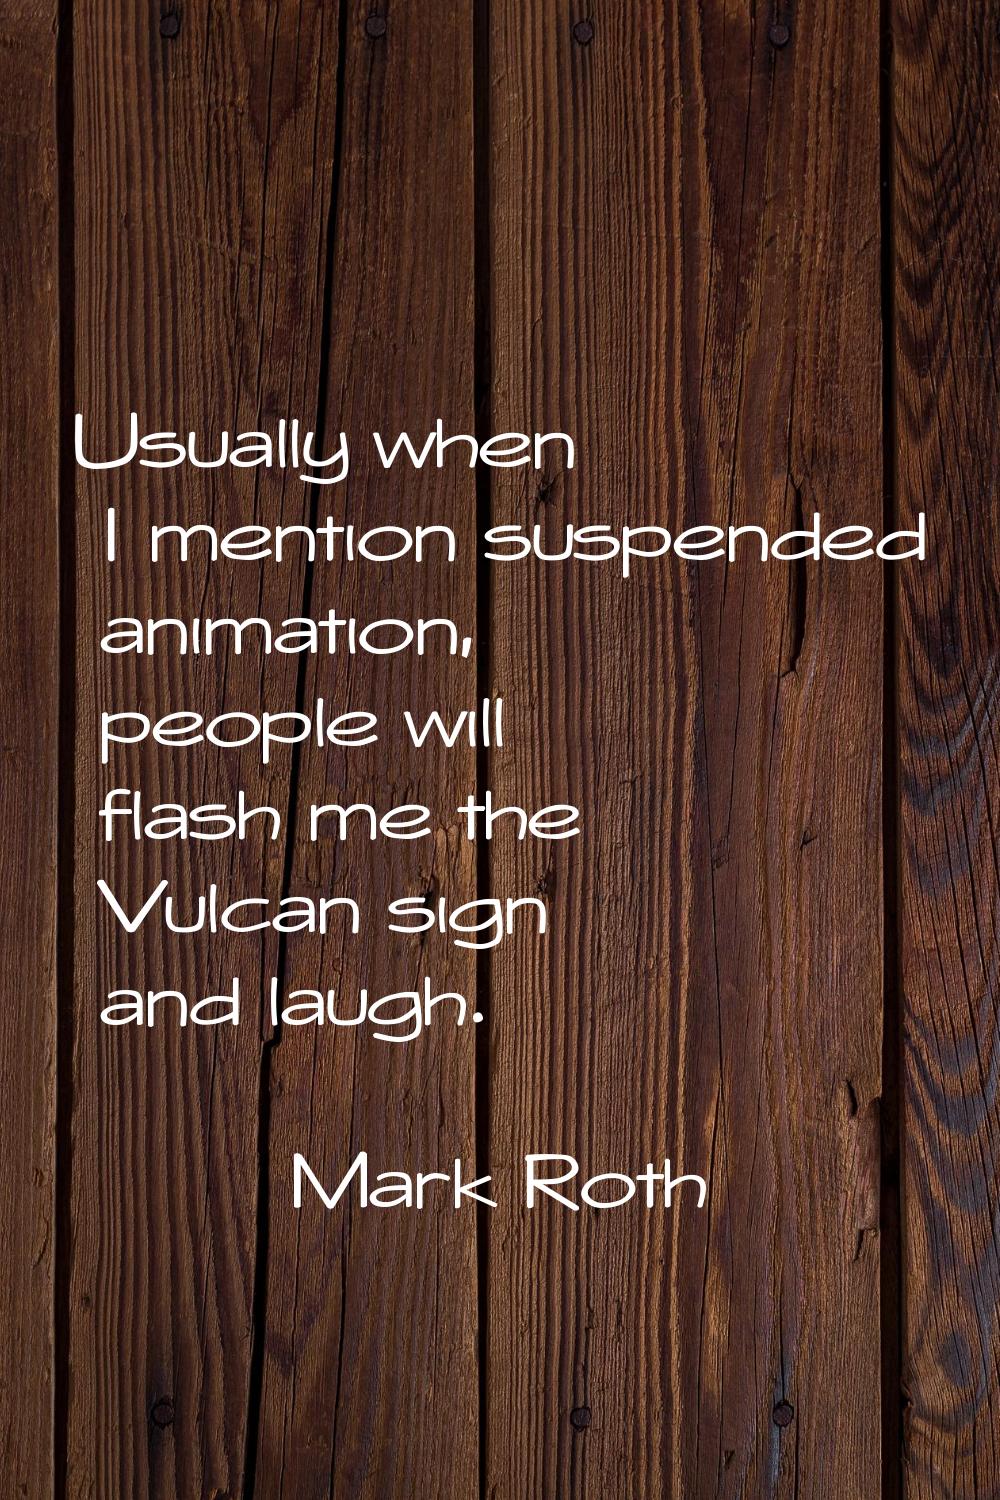 Usually when I mention suspended animation, people will flash me the Vulcan sign and laugh.